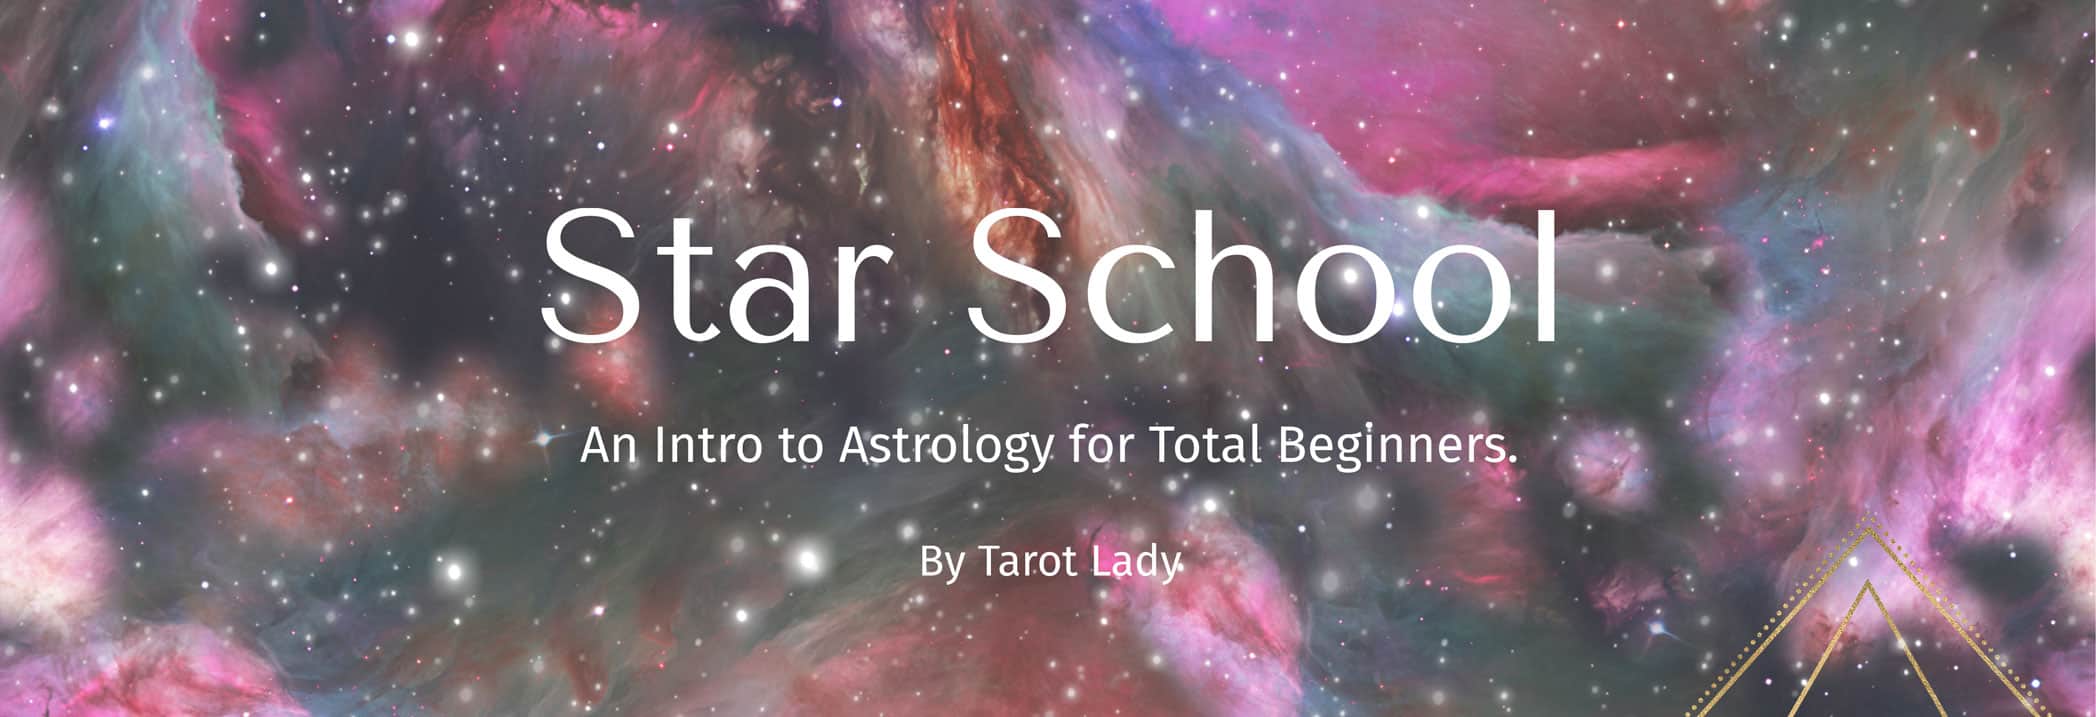 Star School - An Intro to Astrology for Total Beginners